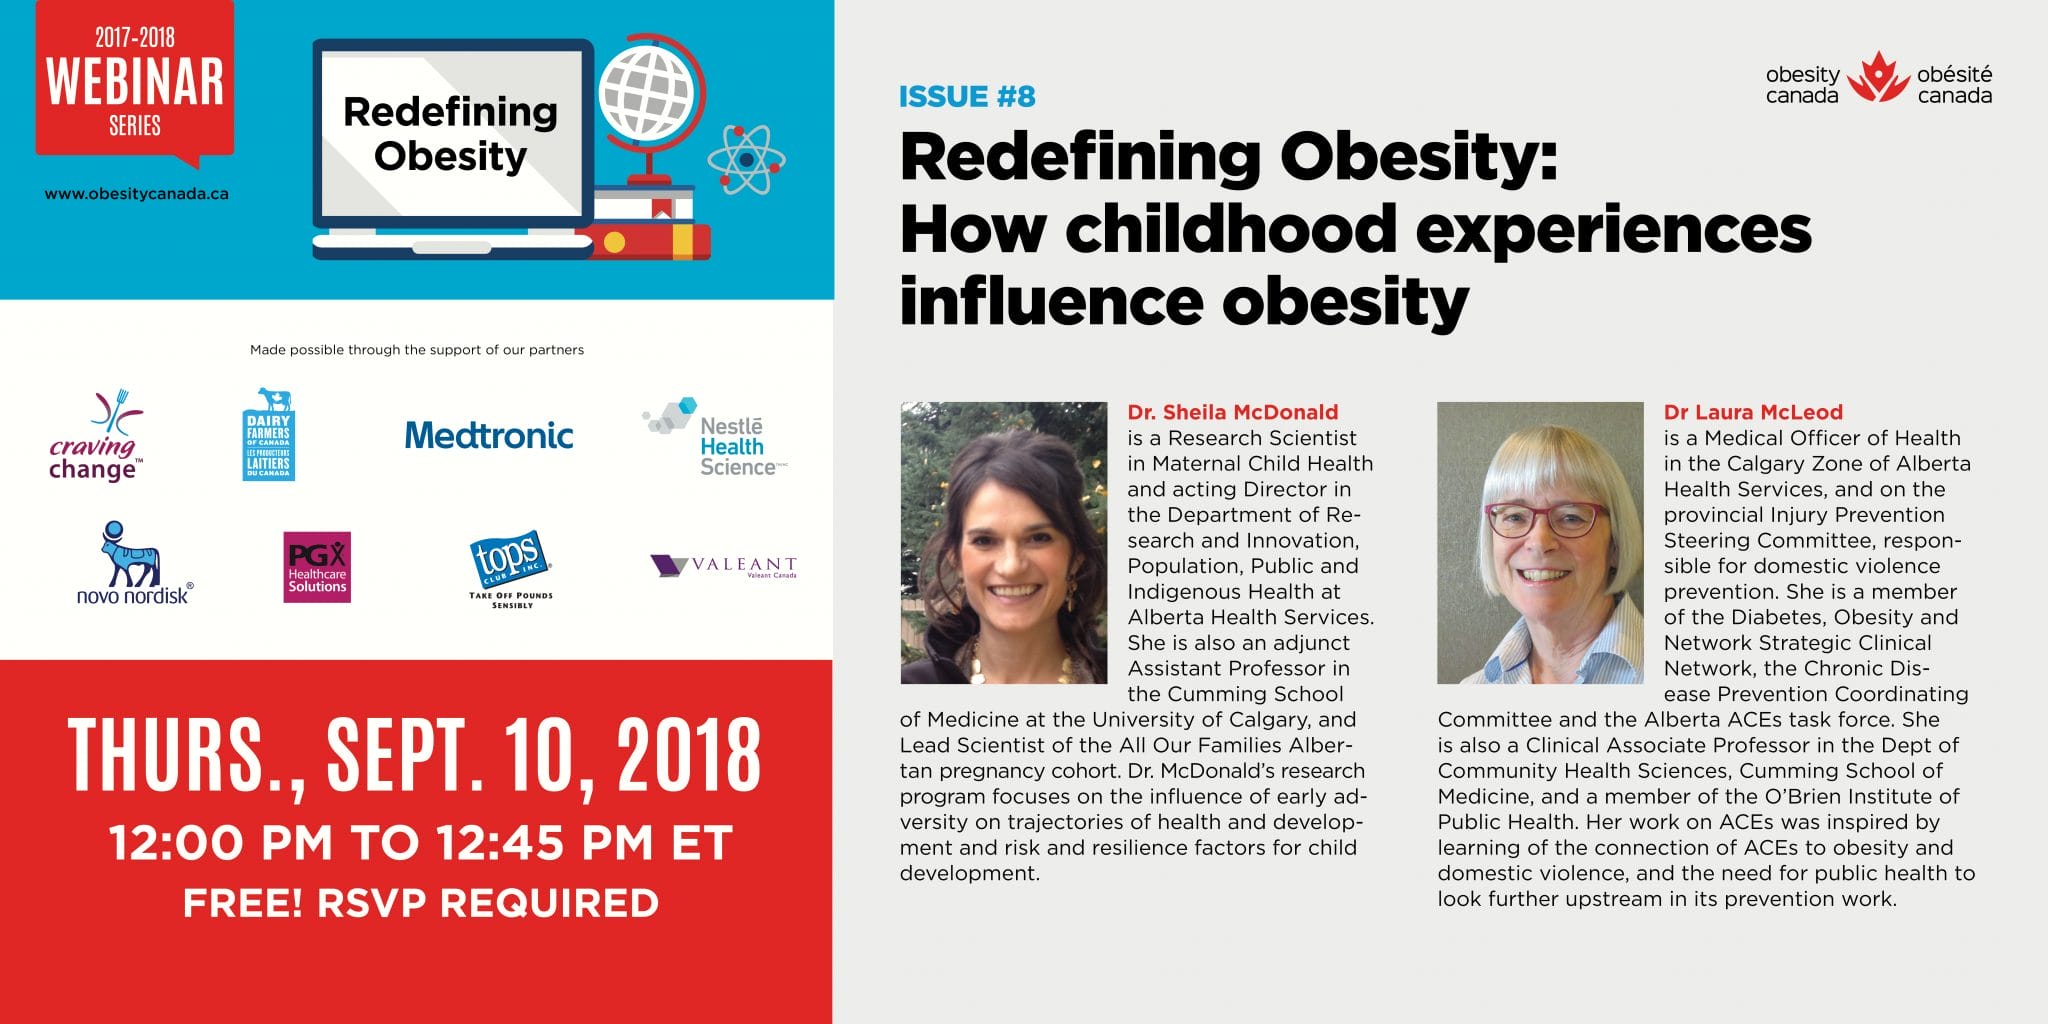 Webinar flyer titled "redefining obesity," featuring a date, time, three guest speakers with photos and titles, and topics on the influence of childhood experiences on obesity.